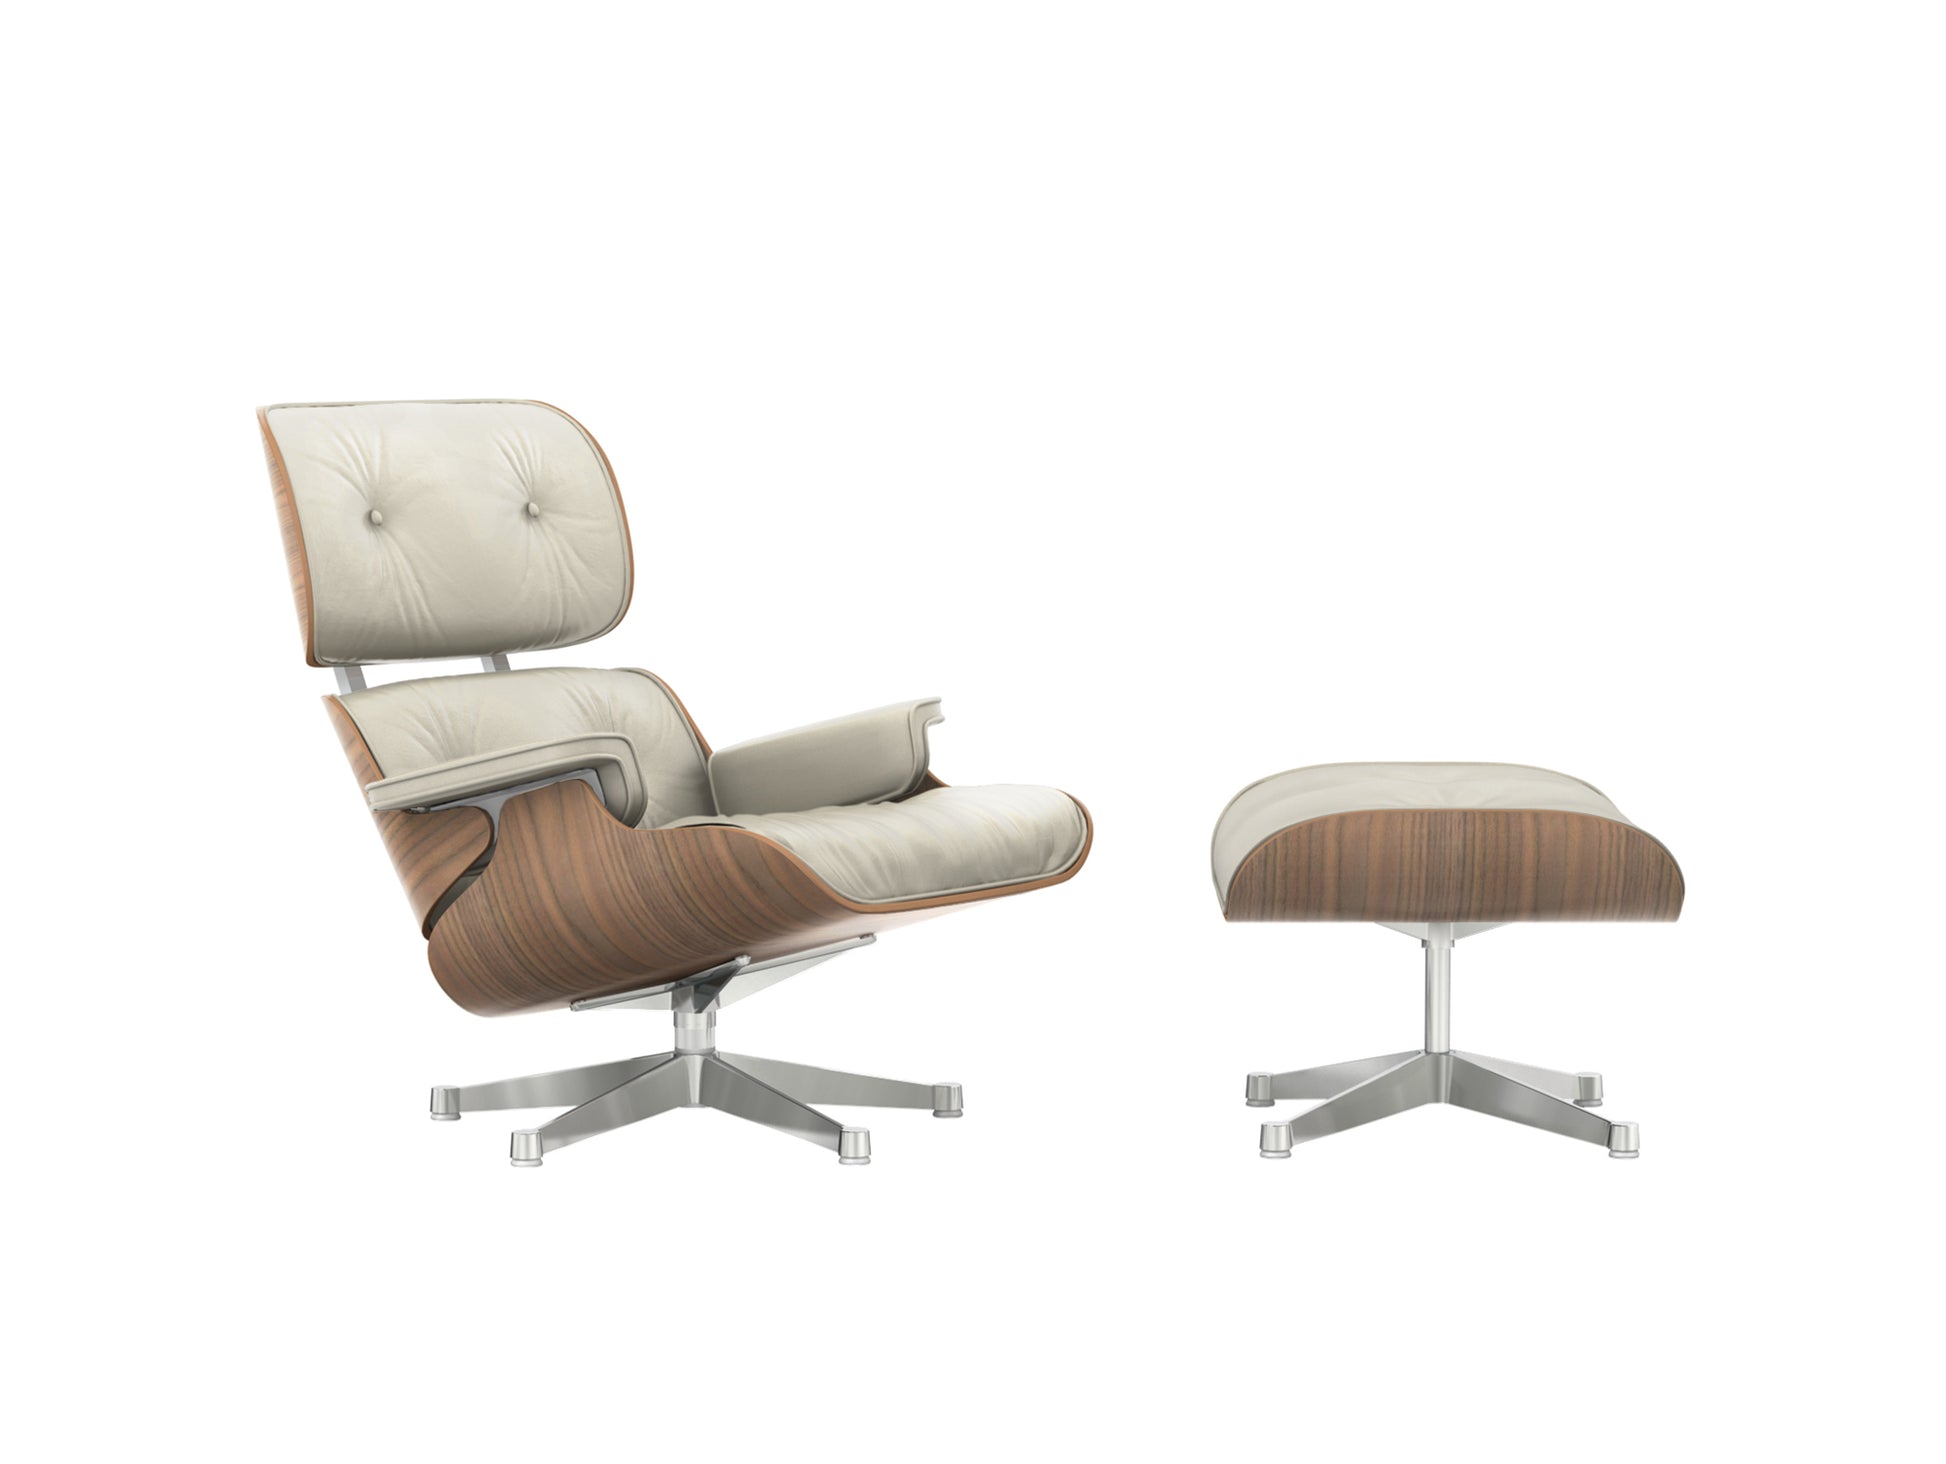 Eames Lounge Chair by Vitra - White Pigmented Walnut / Clay